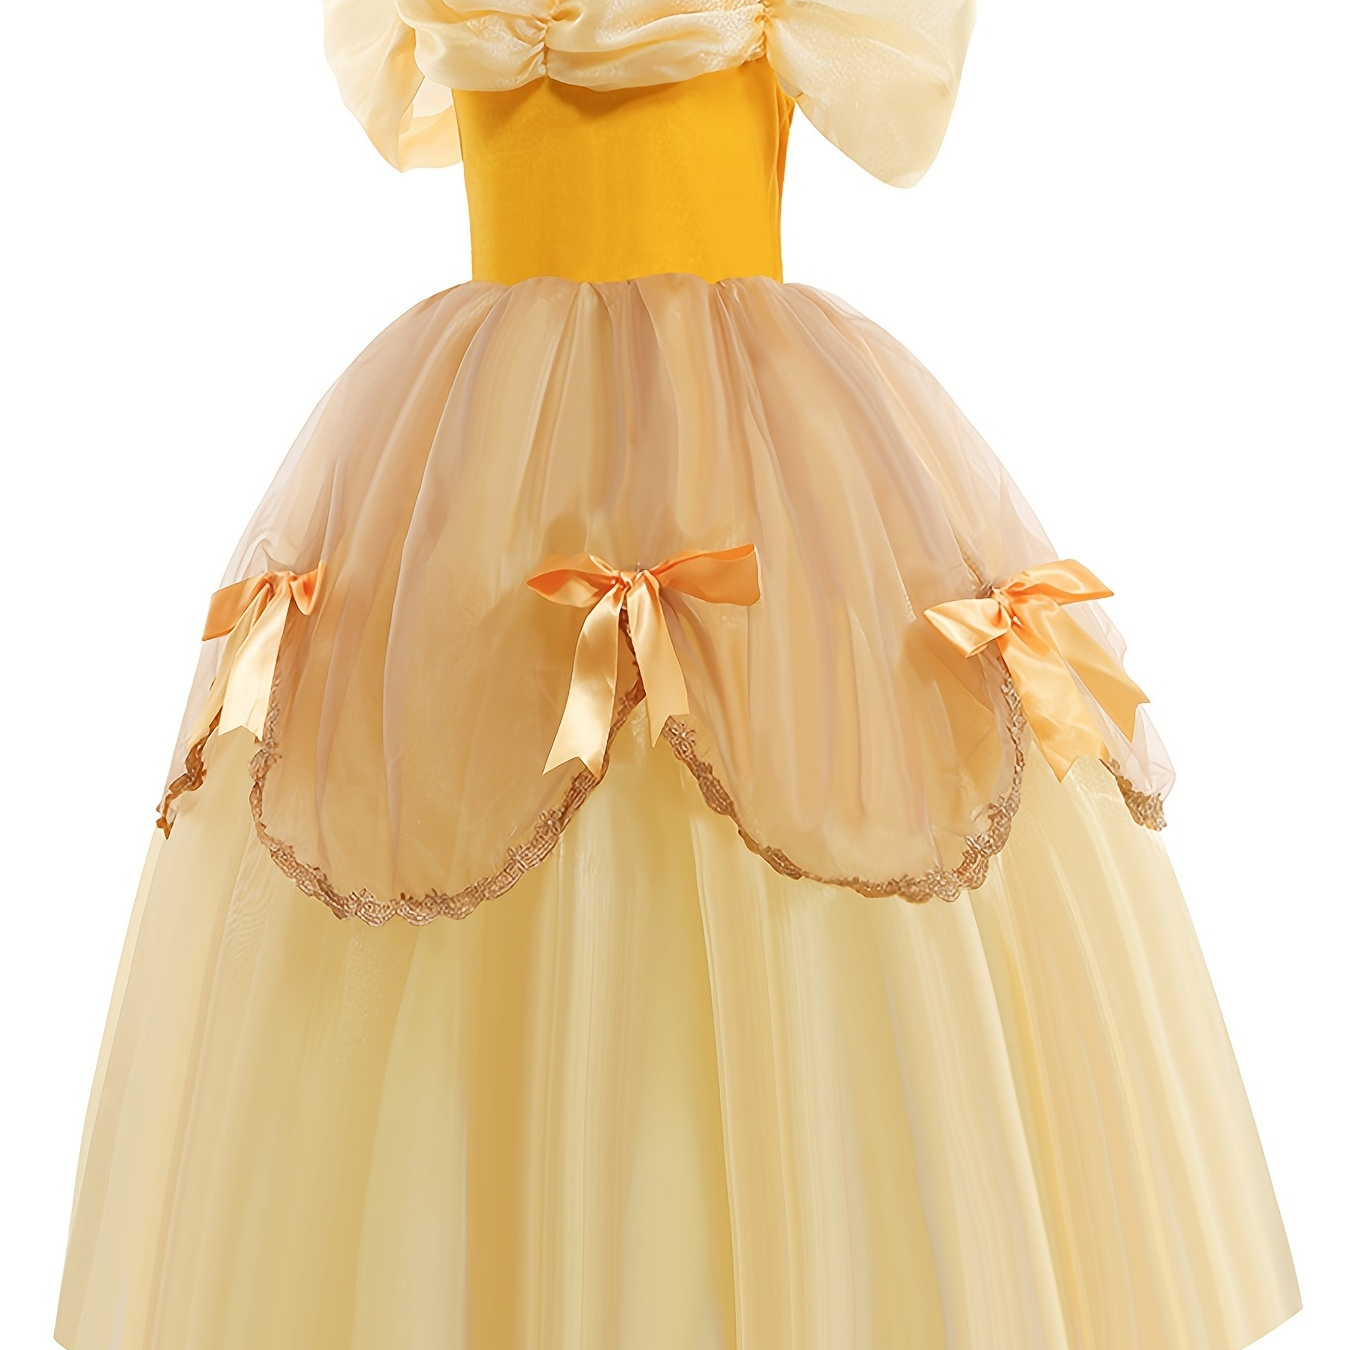 miccostumes Women's Costume Princess Cosplay Yellow Deluxe Ball Gown Party  Prom Dress With Crown Earrings And Gloves : : Toys & Games